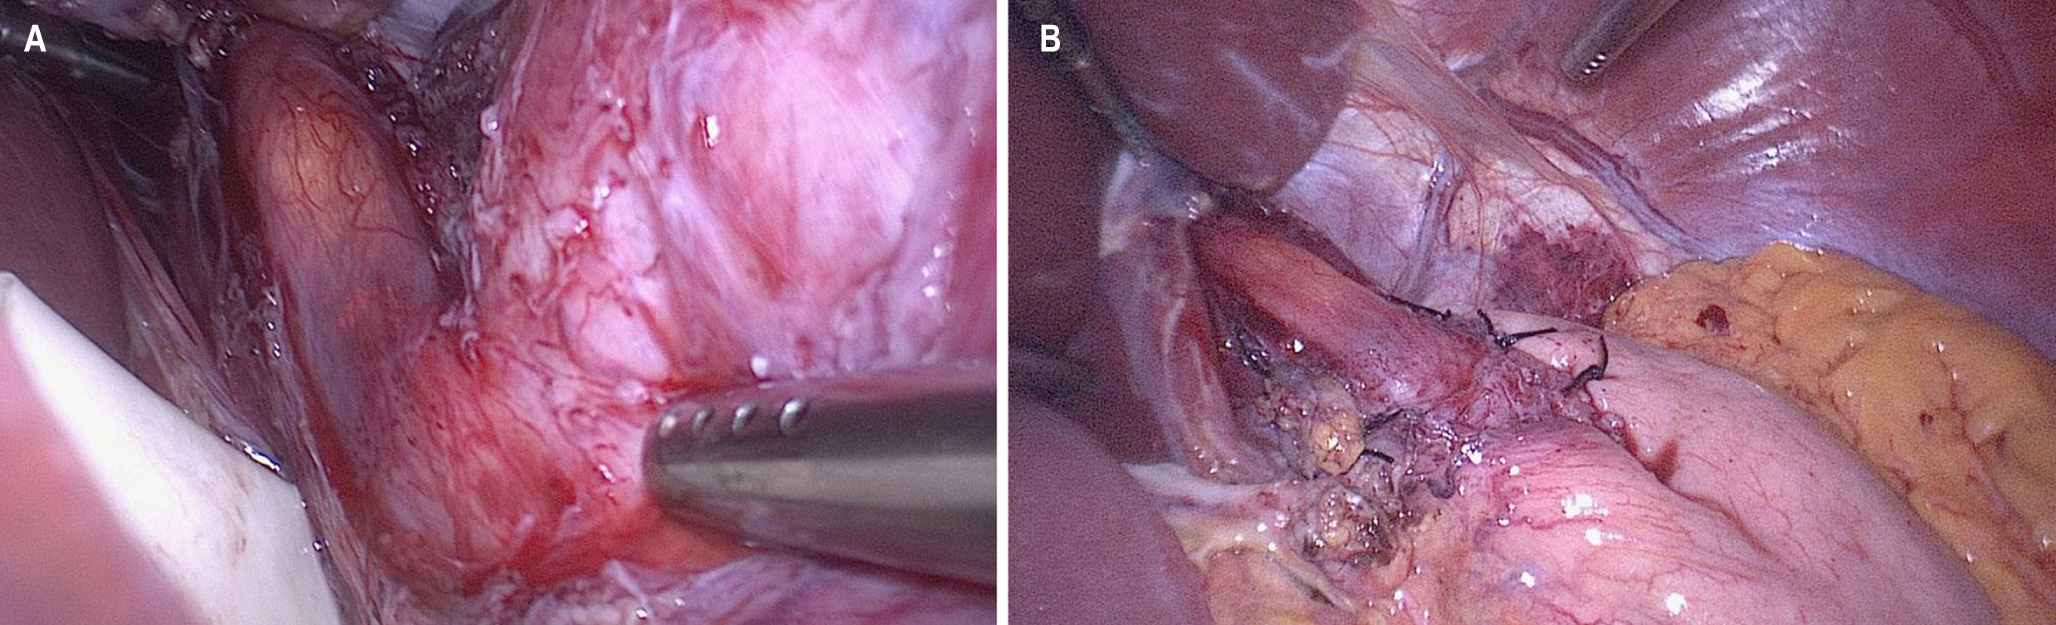 Figure 1. Surgical technique. A. Complete myotomy and verification with intraoperative endoscopy. B. Posterior partial fundoplication (Toupet). Source: Authors’ archive.